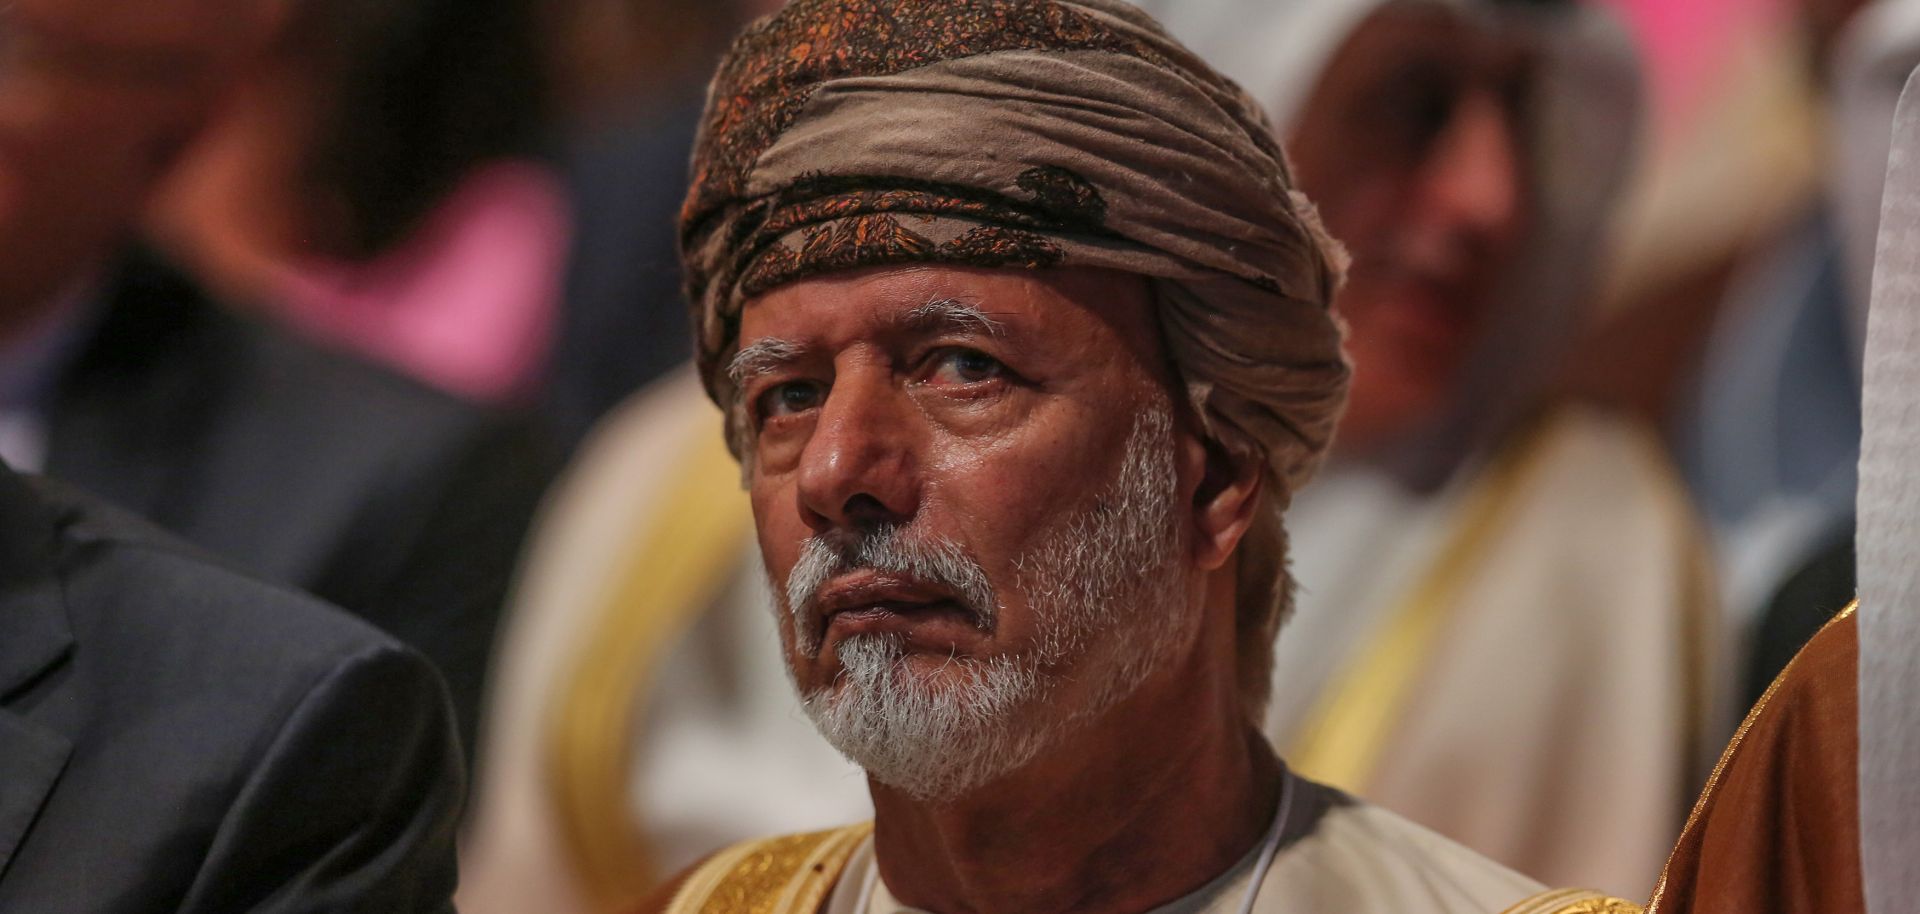 Omani Foreign Ministar Yusuf bin Alawi bin Abdullah at the 2019 World Economic Forum on the Middle East and North Africa in Jordan on April 6, 2019.